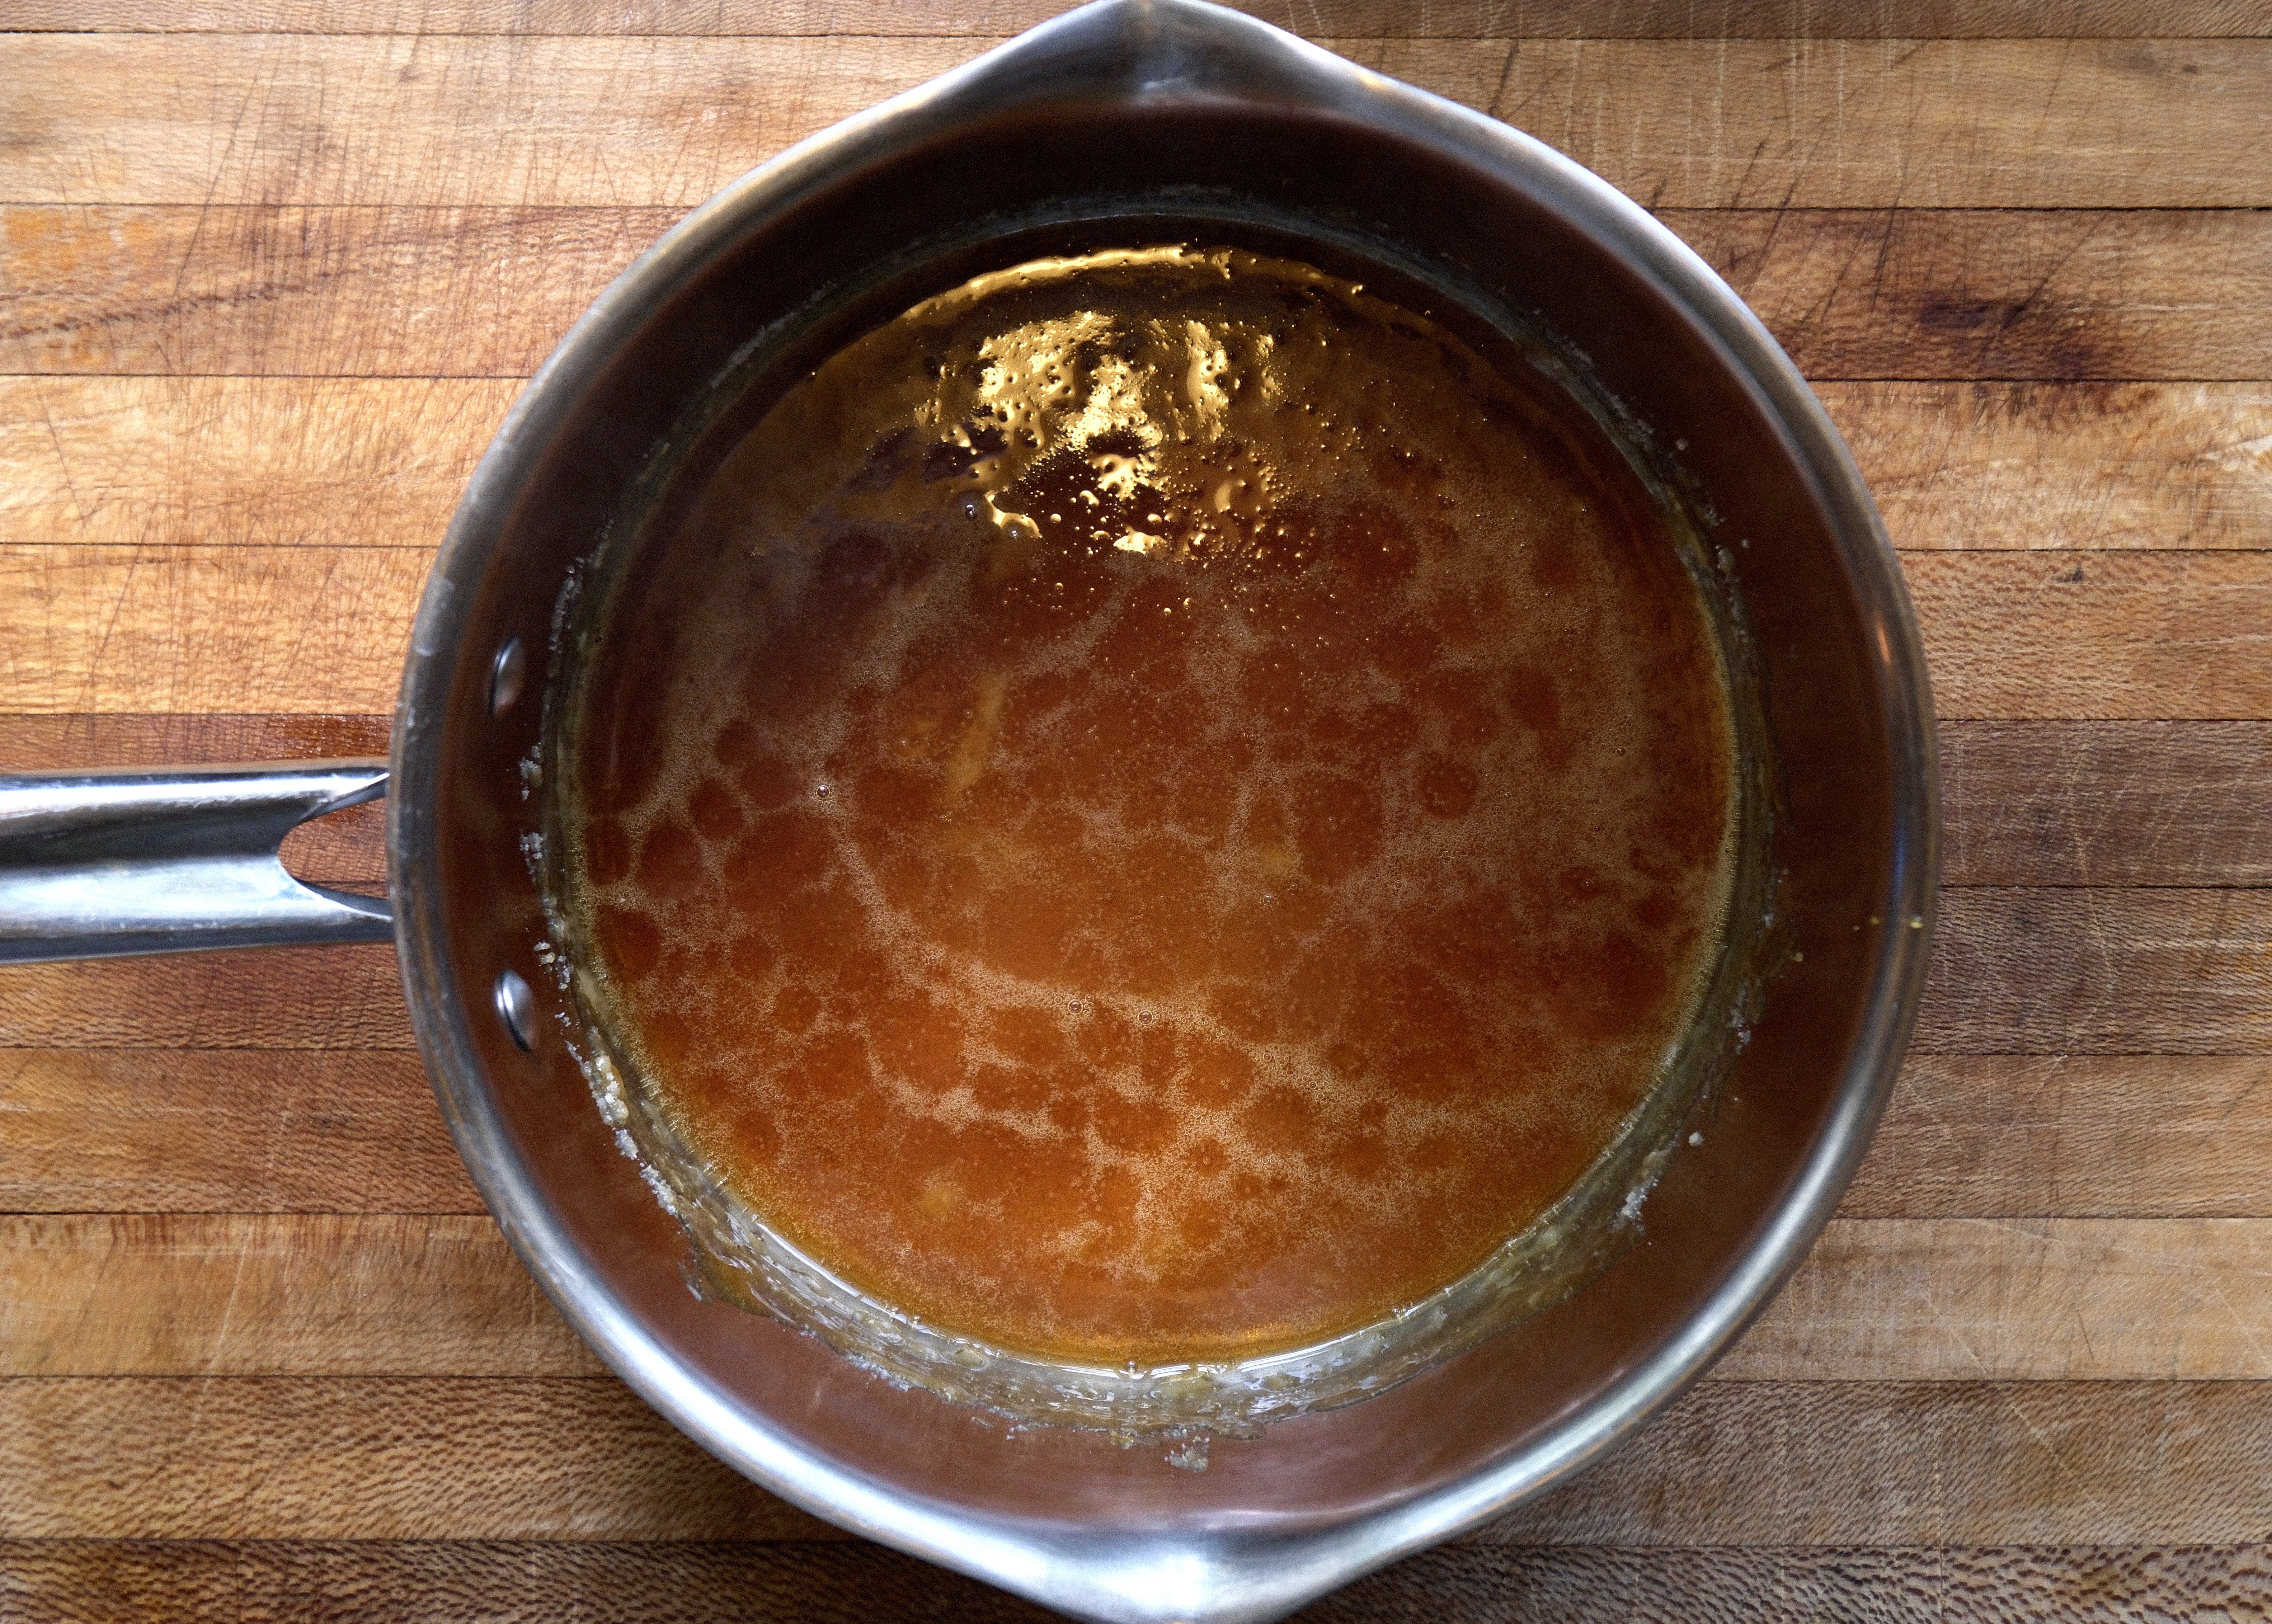 Second stage of amber melted sugar. Creme brûlée coffee syrup.